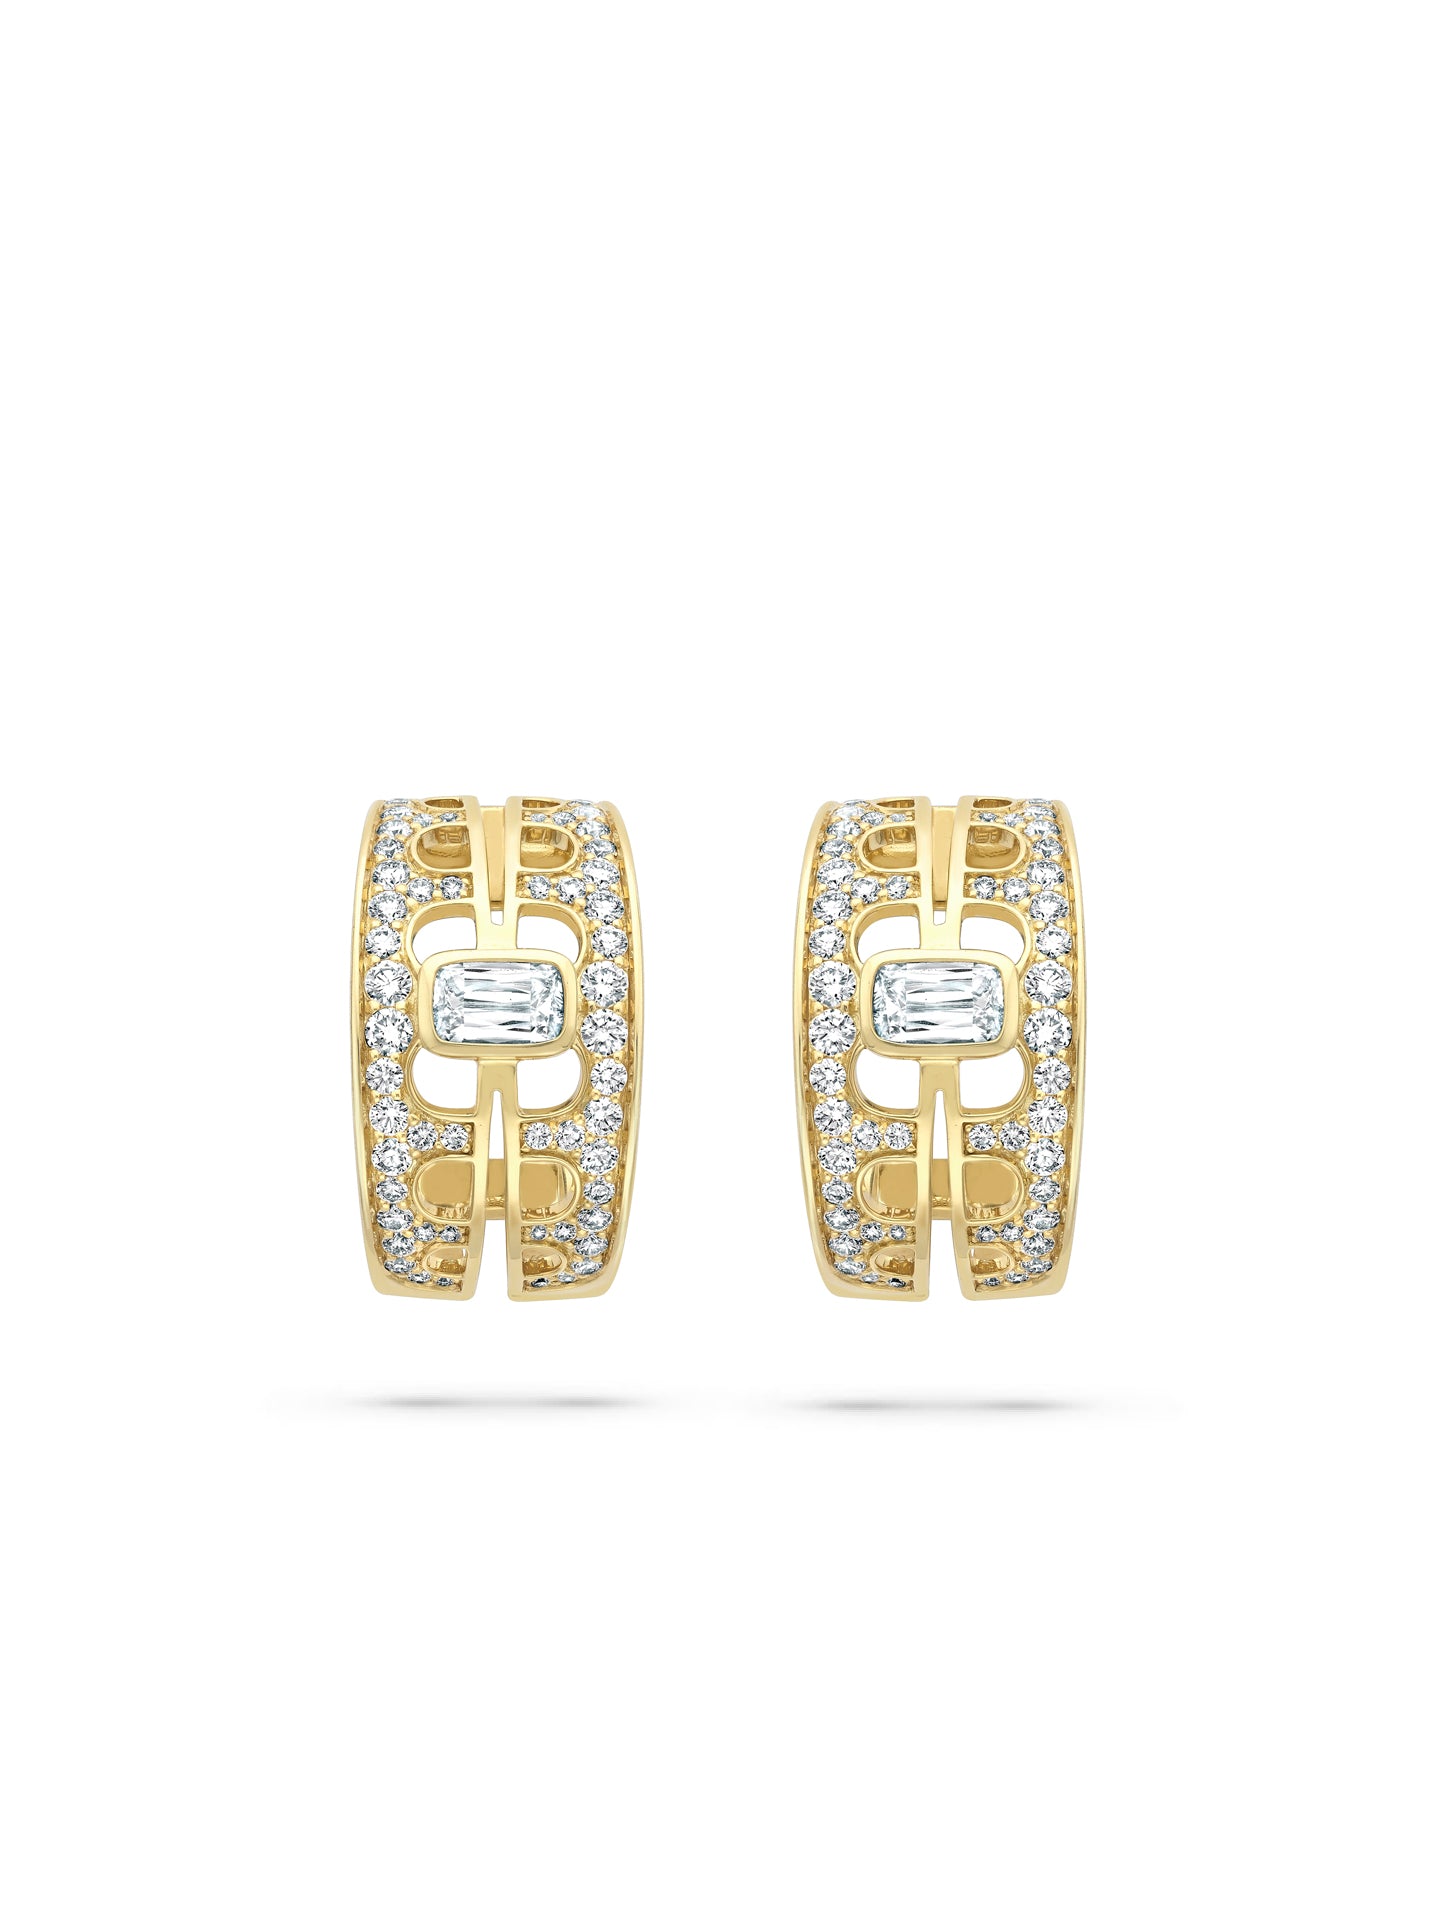 Boodles x The National Gallery Perspective Ashoka Yellow Gold Earrings | Boodles